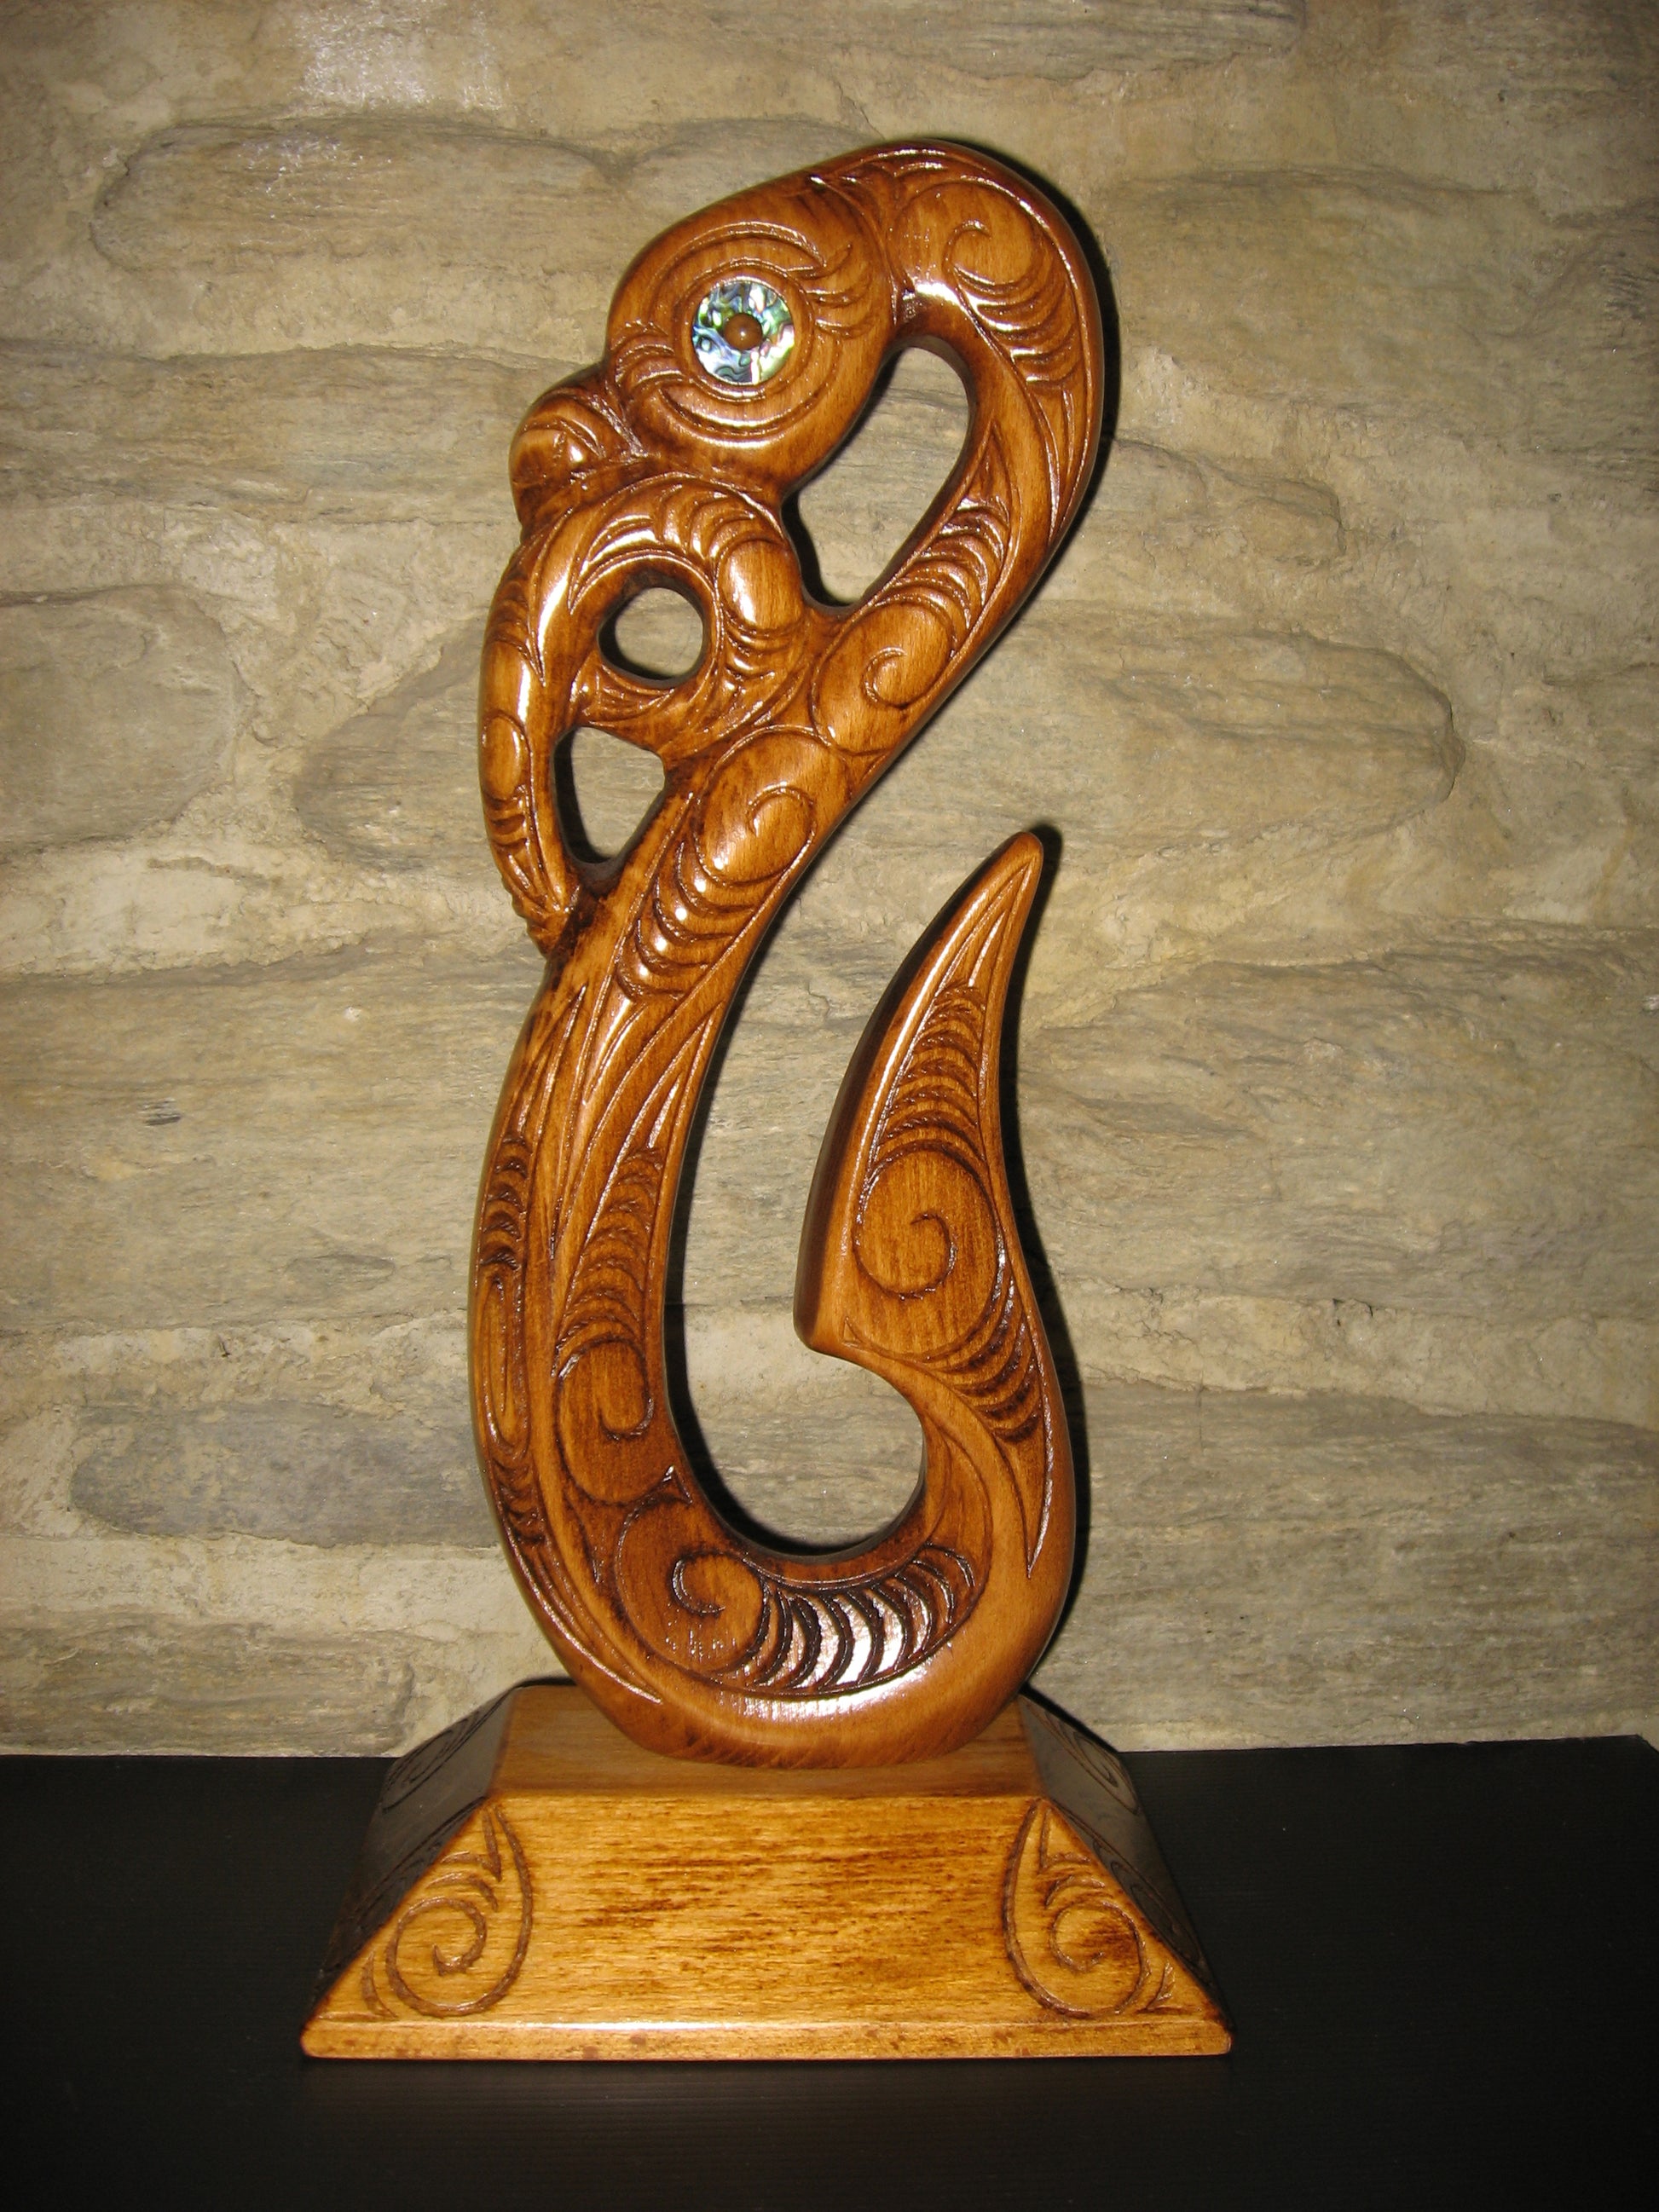 Maori medium matau fish hook carved in New Zealand and available from Silver Fern Gallery